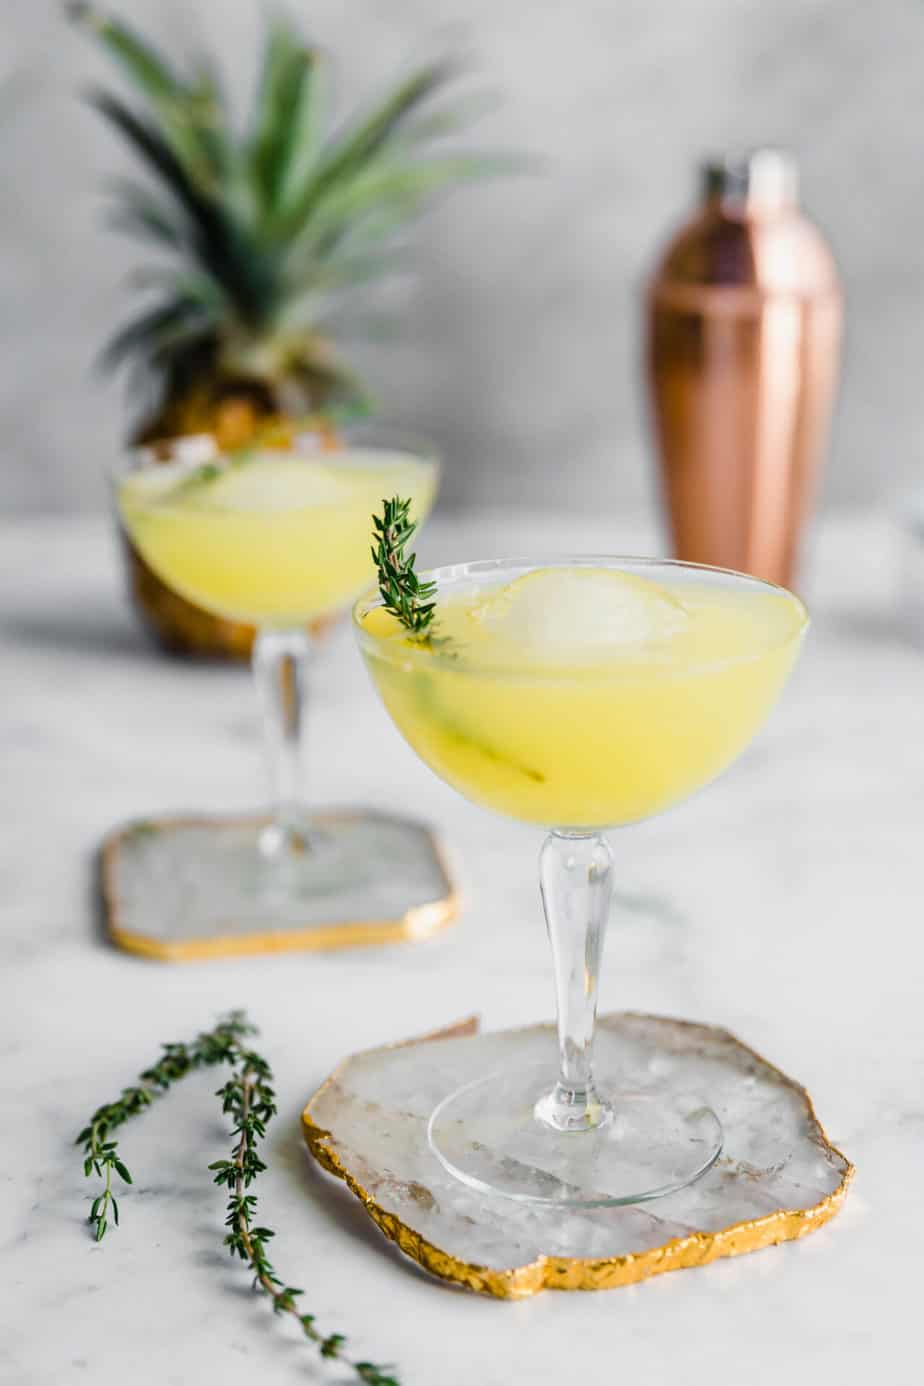 Two Pineapple & Ginger Cocktails served with ice and a sprig of fresh thyme.